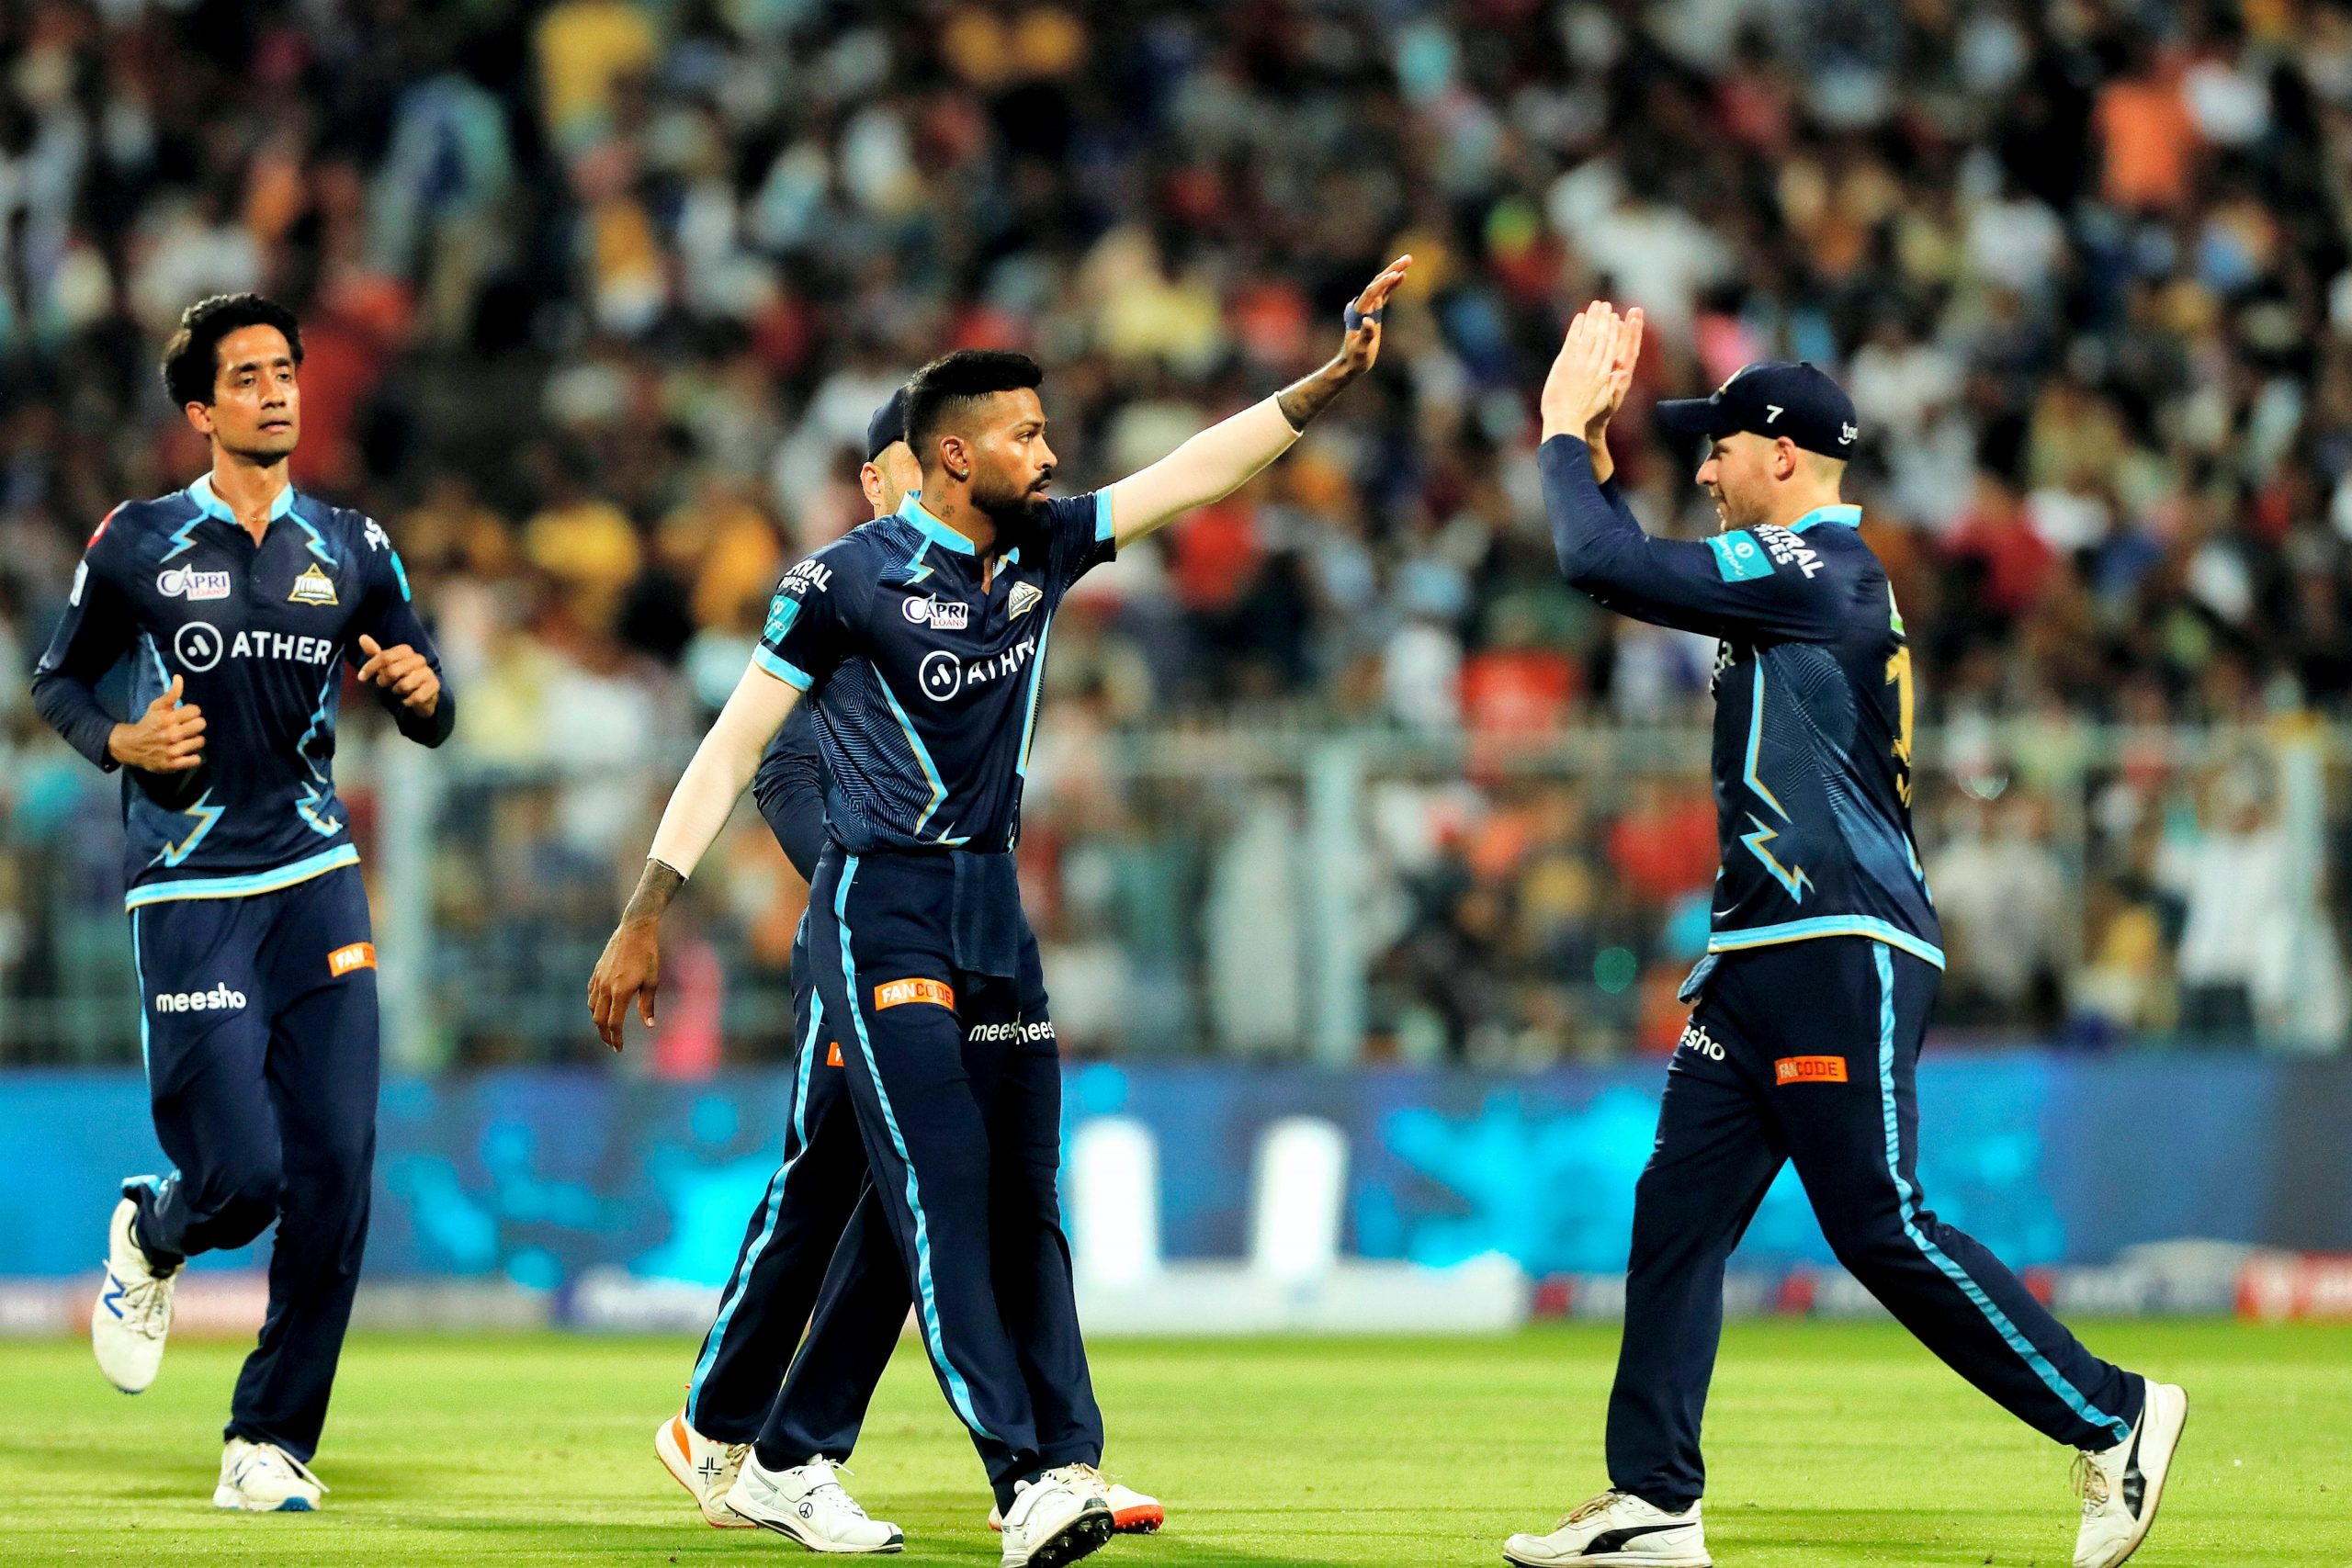 Gujarat Titans beat Rajasthan Royals by 7 wickets to qualify for IPL 2022 final